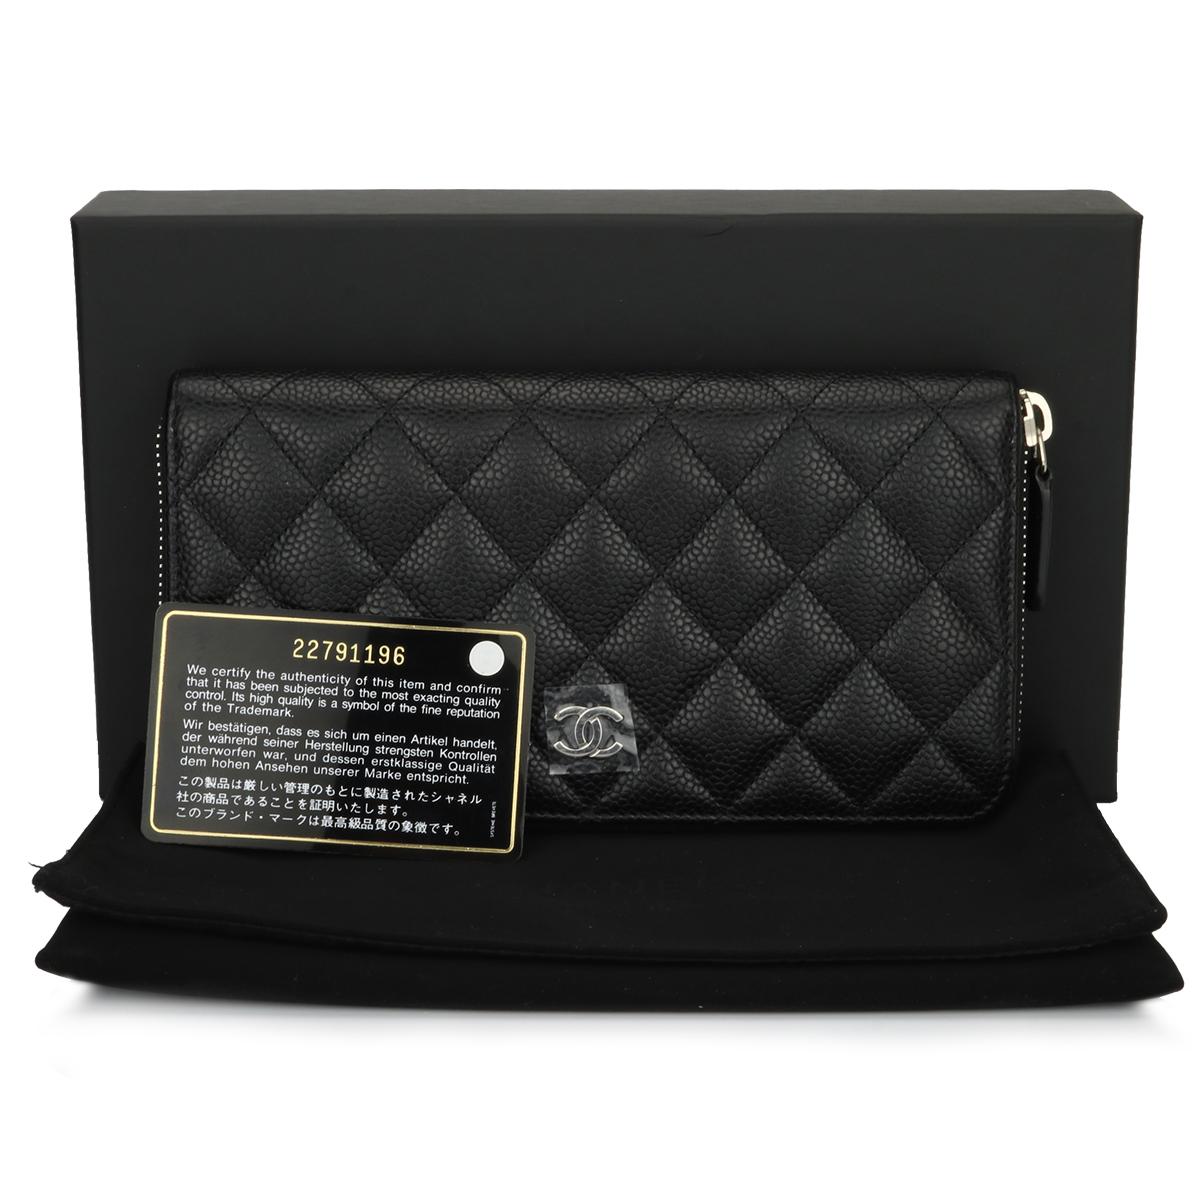 Authentic CHANEL Classic Zipped Wallet Black Caviar with Silver Hardware 2016.

This stunning wallet is in a mint condition, the wallet still holds its original shape, and the hardware is still very shiny.

Exterior Condition: Excellent condition,